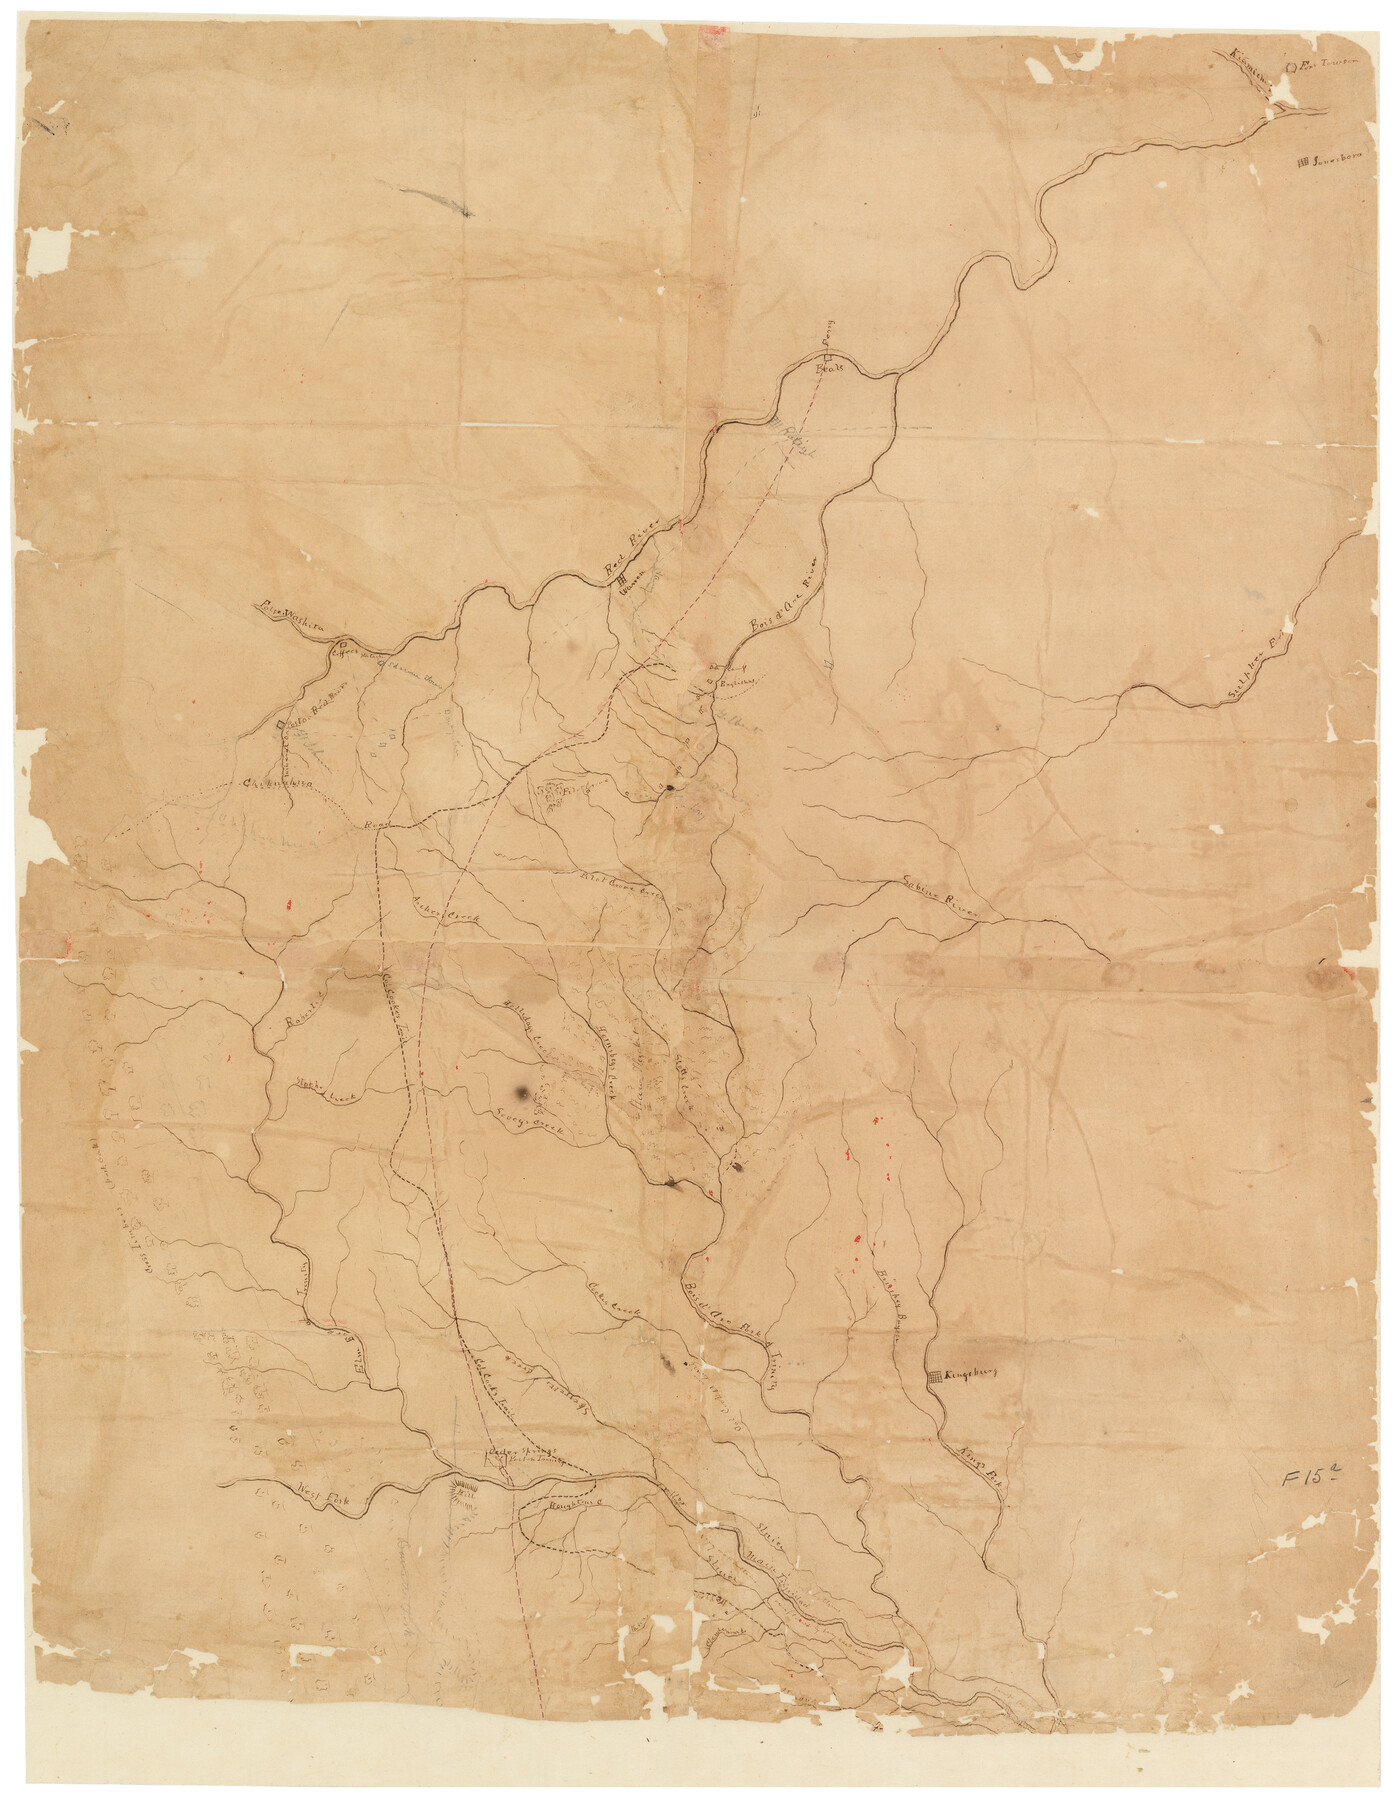 166, [Sketch of Col. Cooke's Military Road expedition from Red River to Austin], General Map Collection